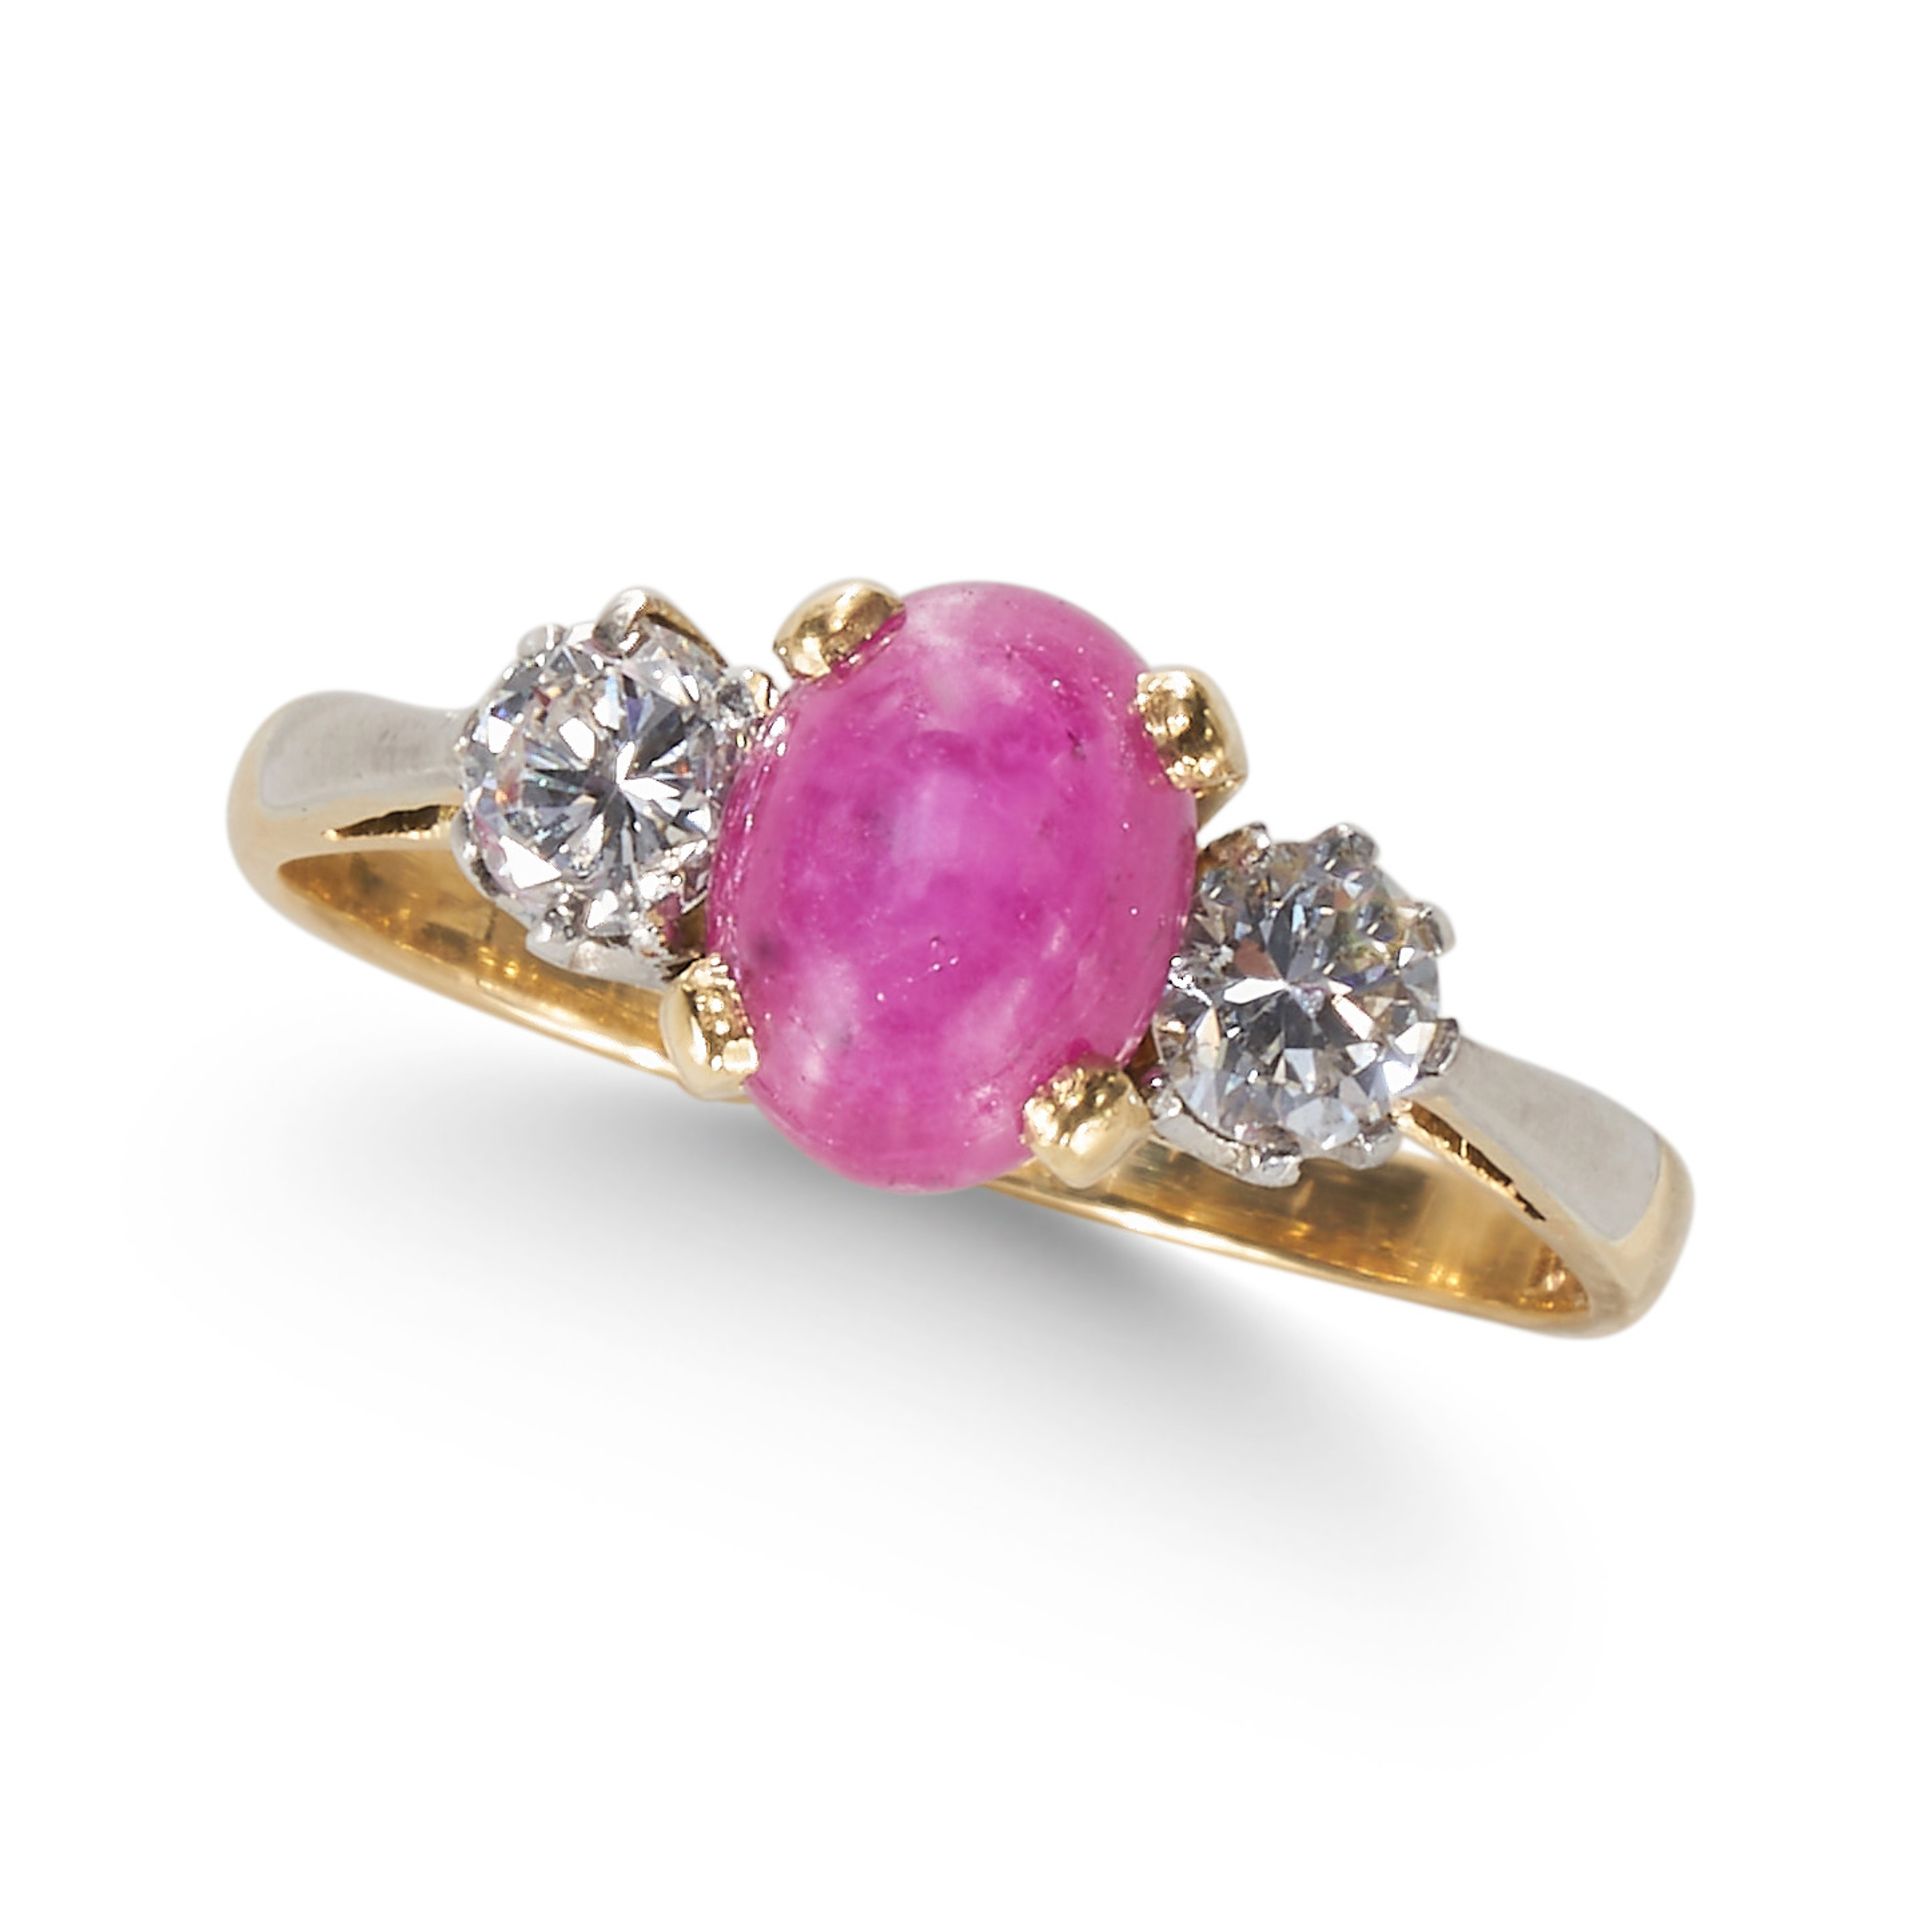 A BURMA NO HEAT CABOCHON RUBY AND DIAMOND THREE STONE RING, IN 18CT YELLOW GOLD.